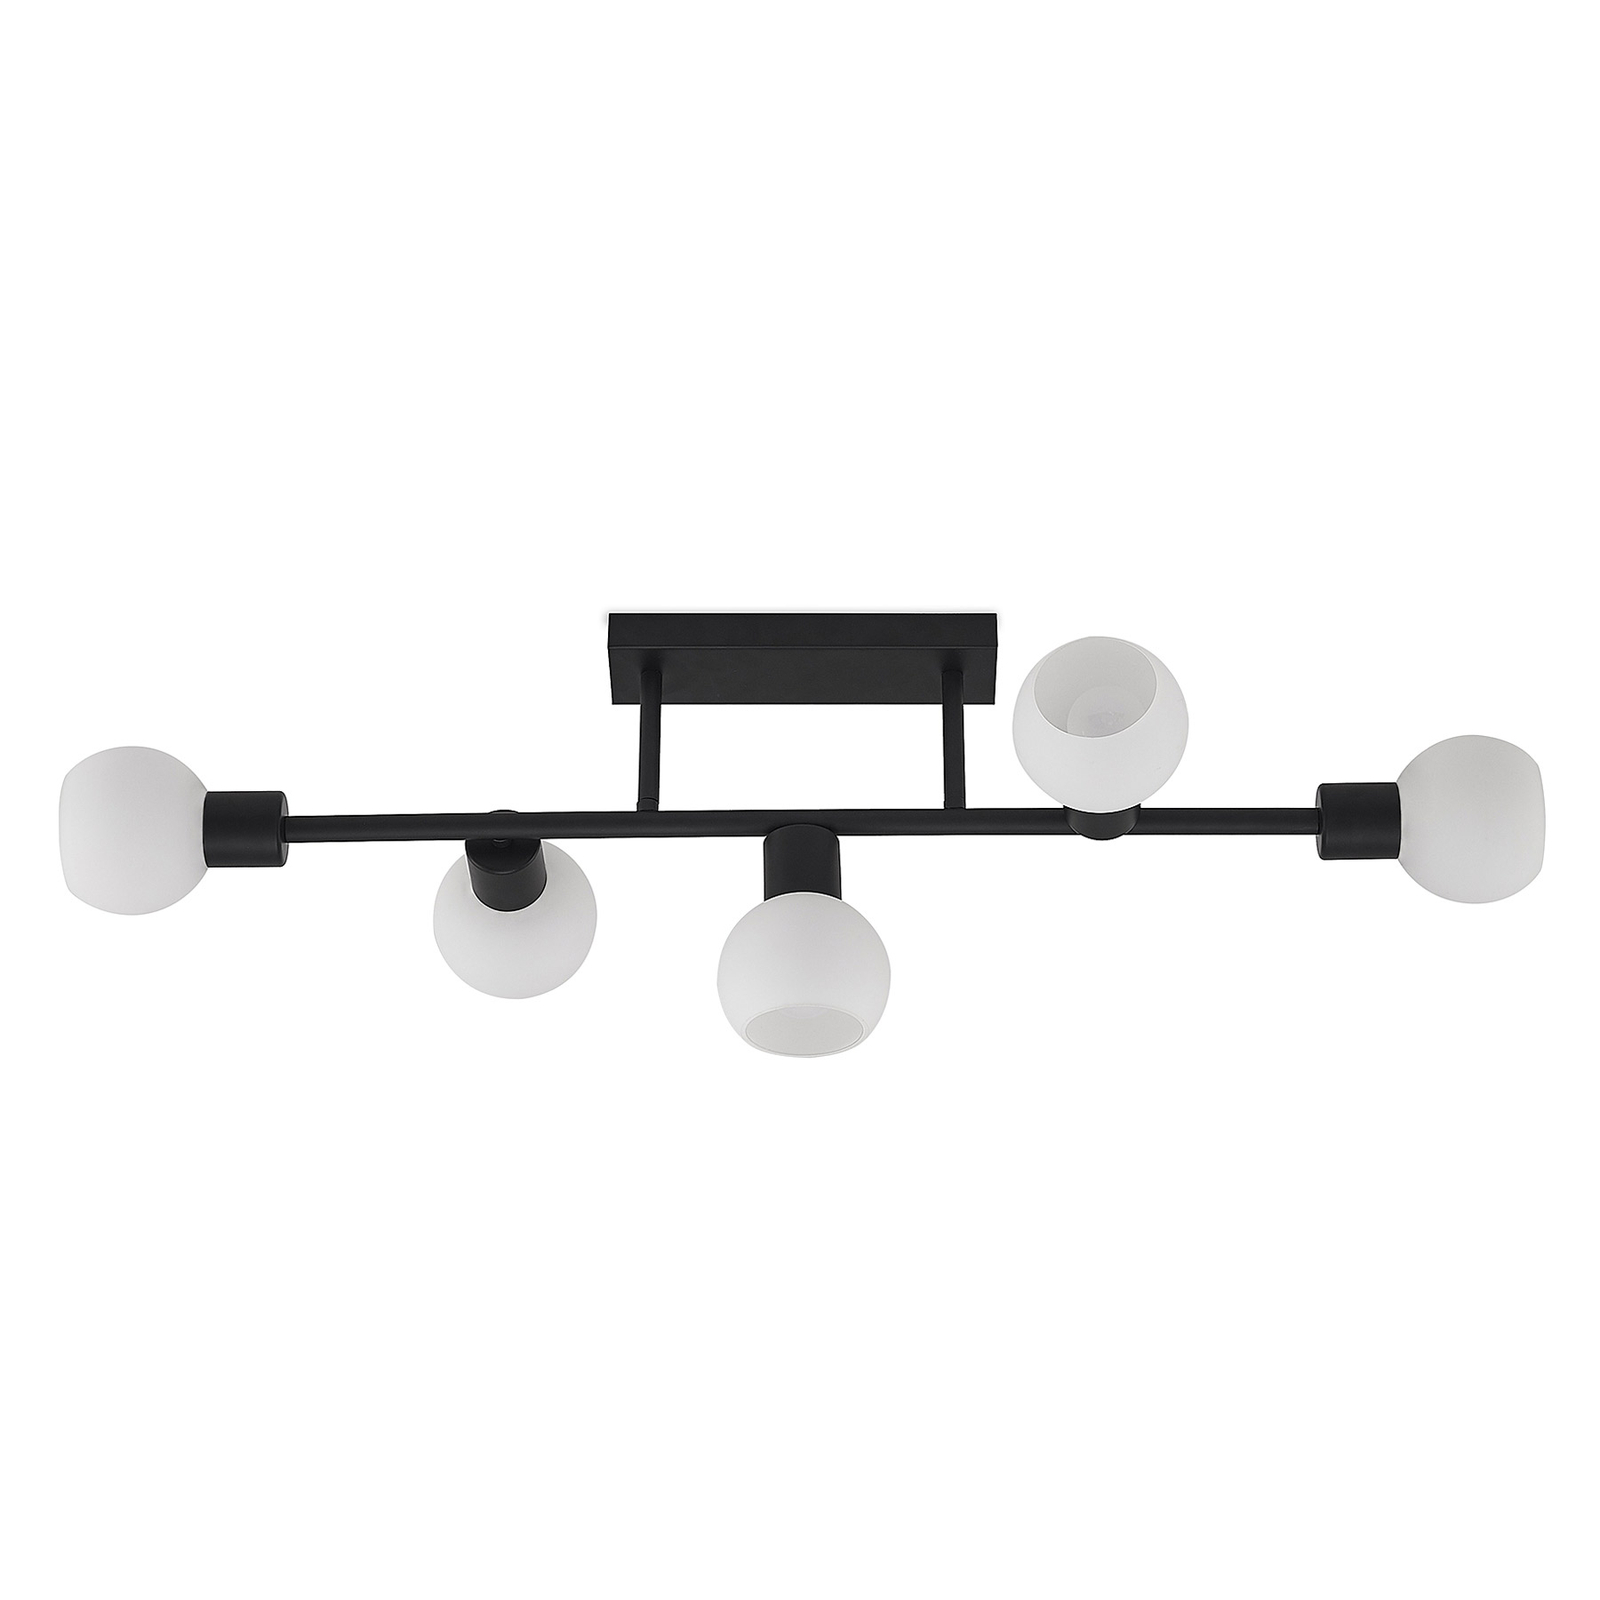 Lindby Biscala plafón 5 luces negro/opalino